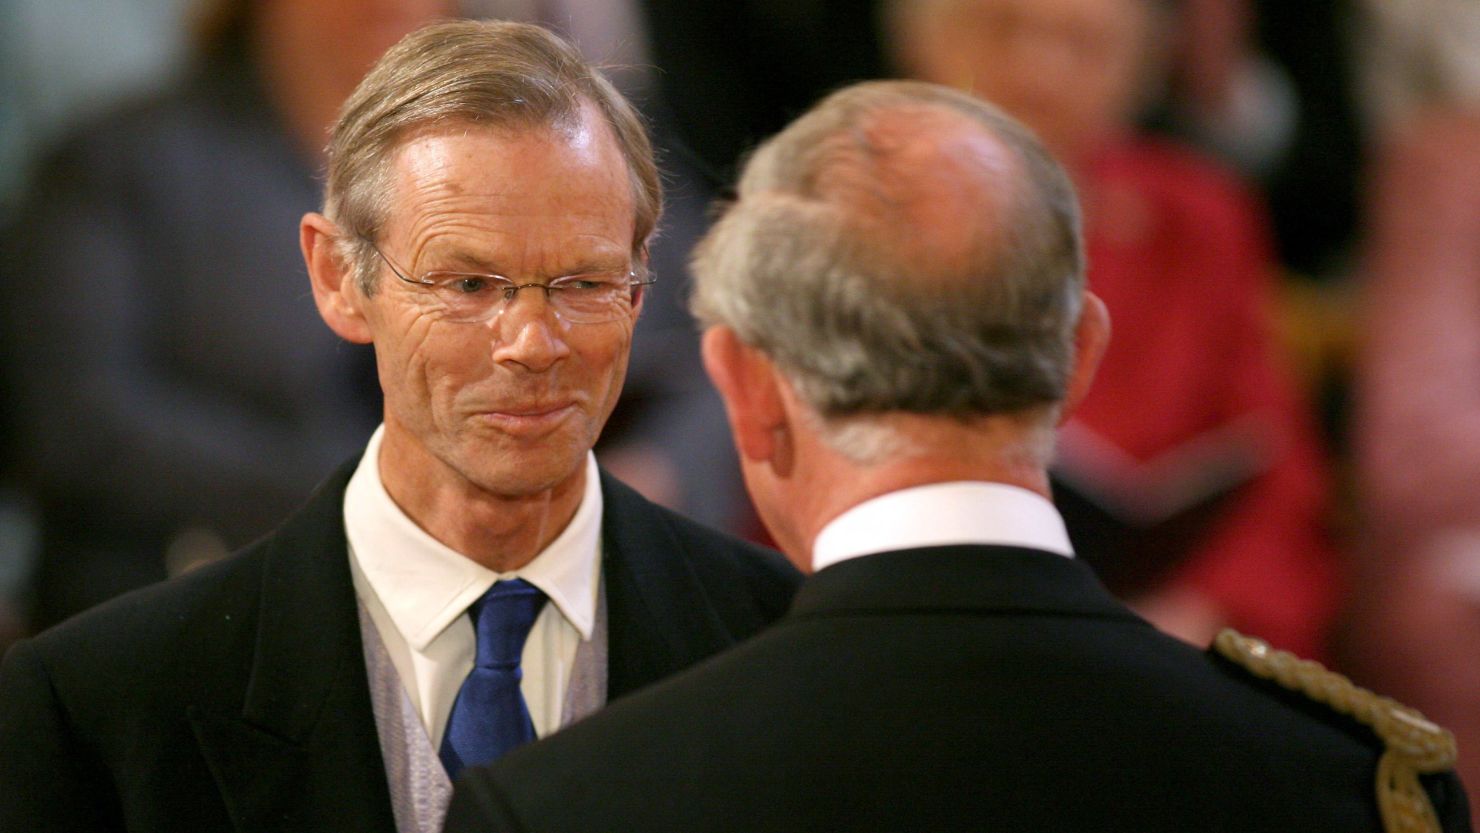 Cricket journalist Christopher Martin-Jenkins receives the MBE from Prince Charles at Buckingham Palace in May 2009 in London.